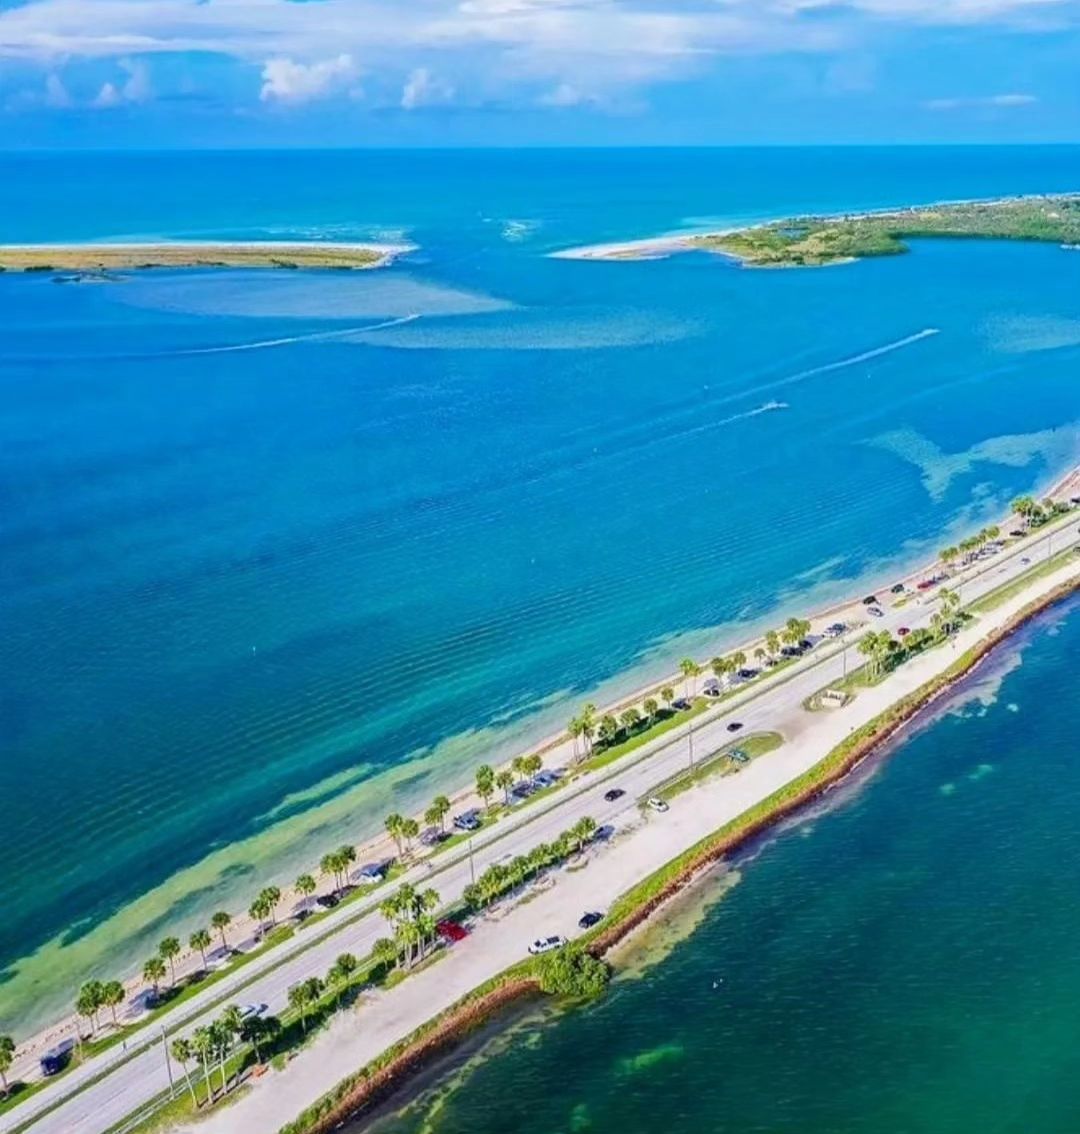 These views never get old! Dunedin Causeway, Caladesi and Honeymoon Island State Parks in the distance! 🩵🐚🌴🏖
.
.
➢ Credit 👉🏆📸  @freedomboatclubtampabay 
.
#dunedinflorida #dunedinfl#tampabay #visitflorida#florida #sunshinestate #palmharbor #clearwaterfl  #staysaltyflorida